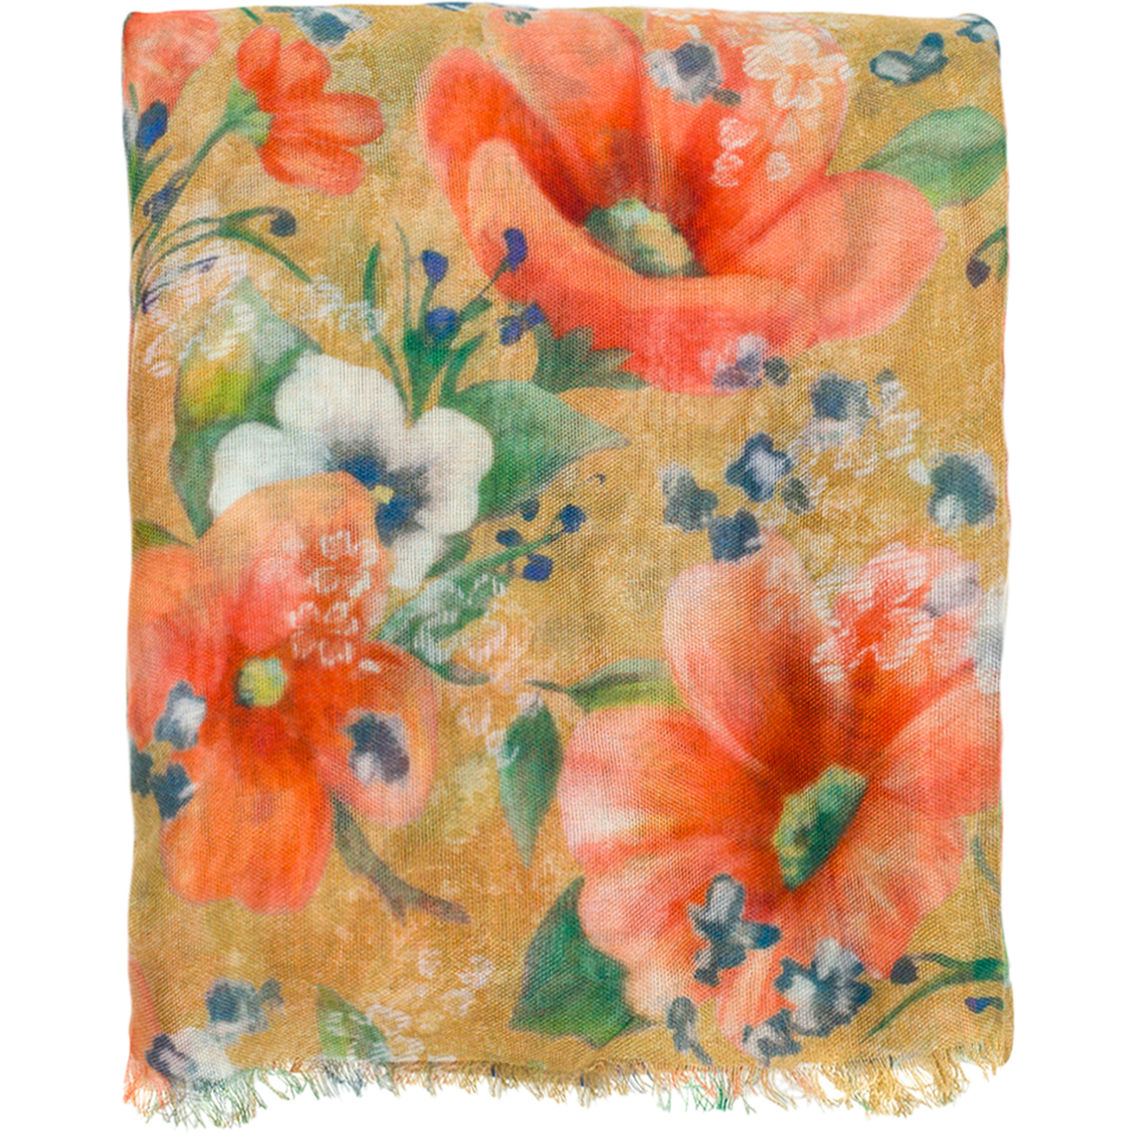 Patricia Nash Apricot Blossoms Scarf - Image 3 of 3